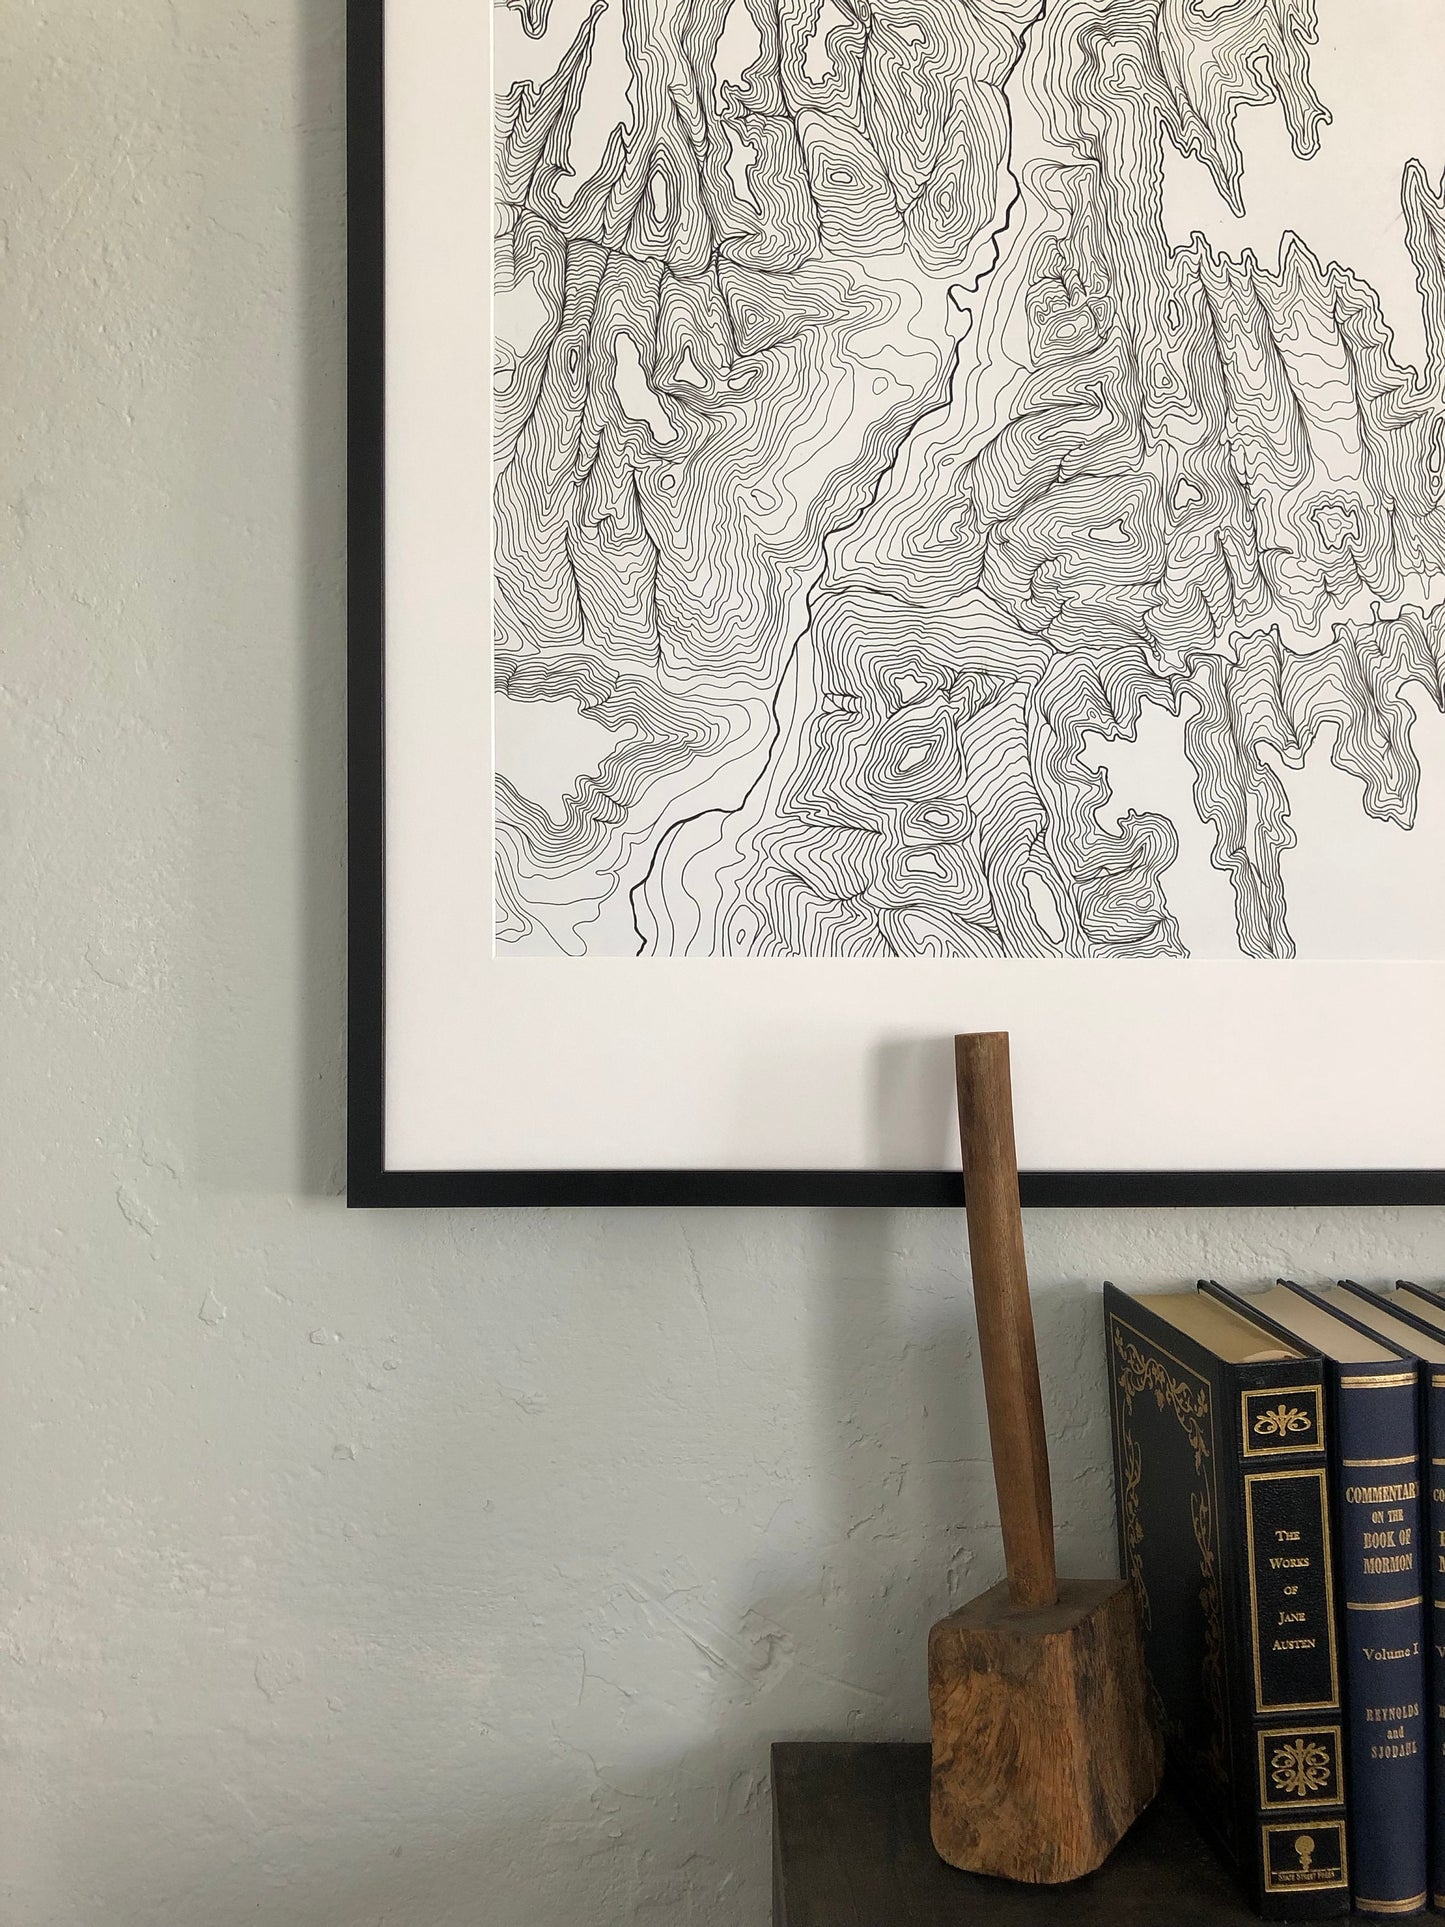 Zion National Park Topographical Map - 24x36 giclee print